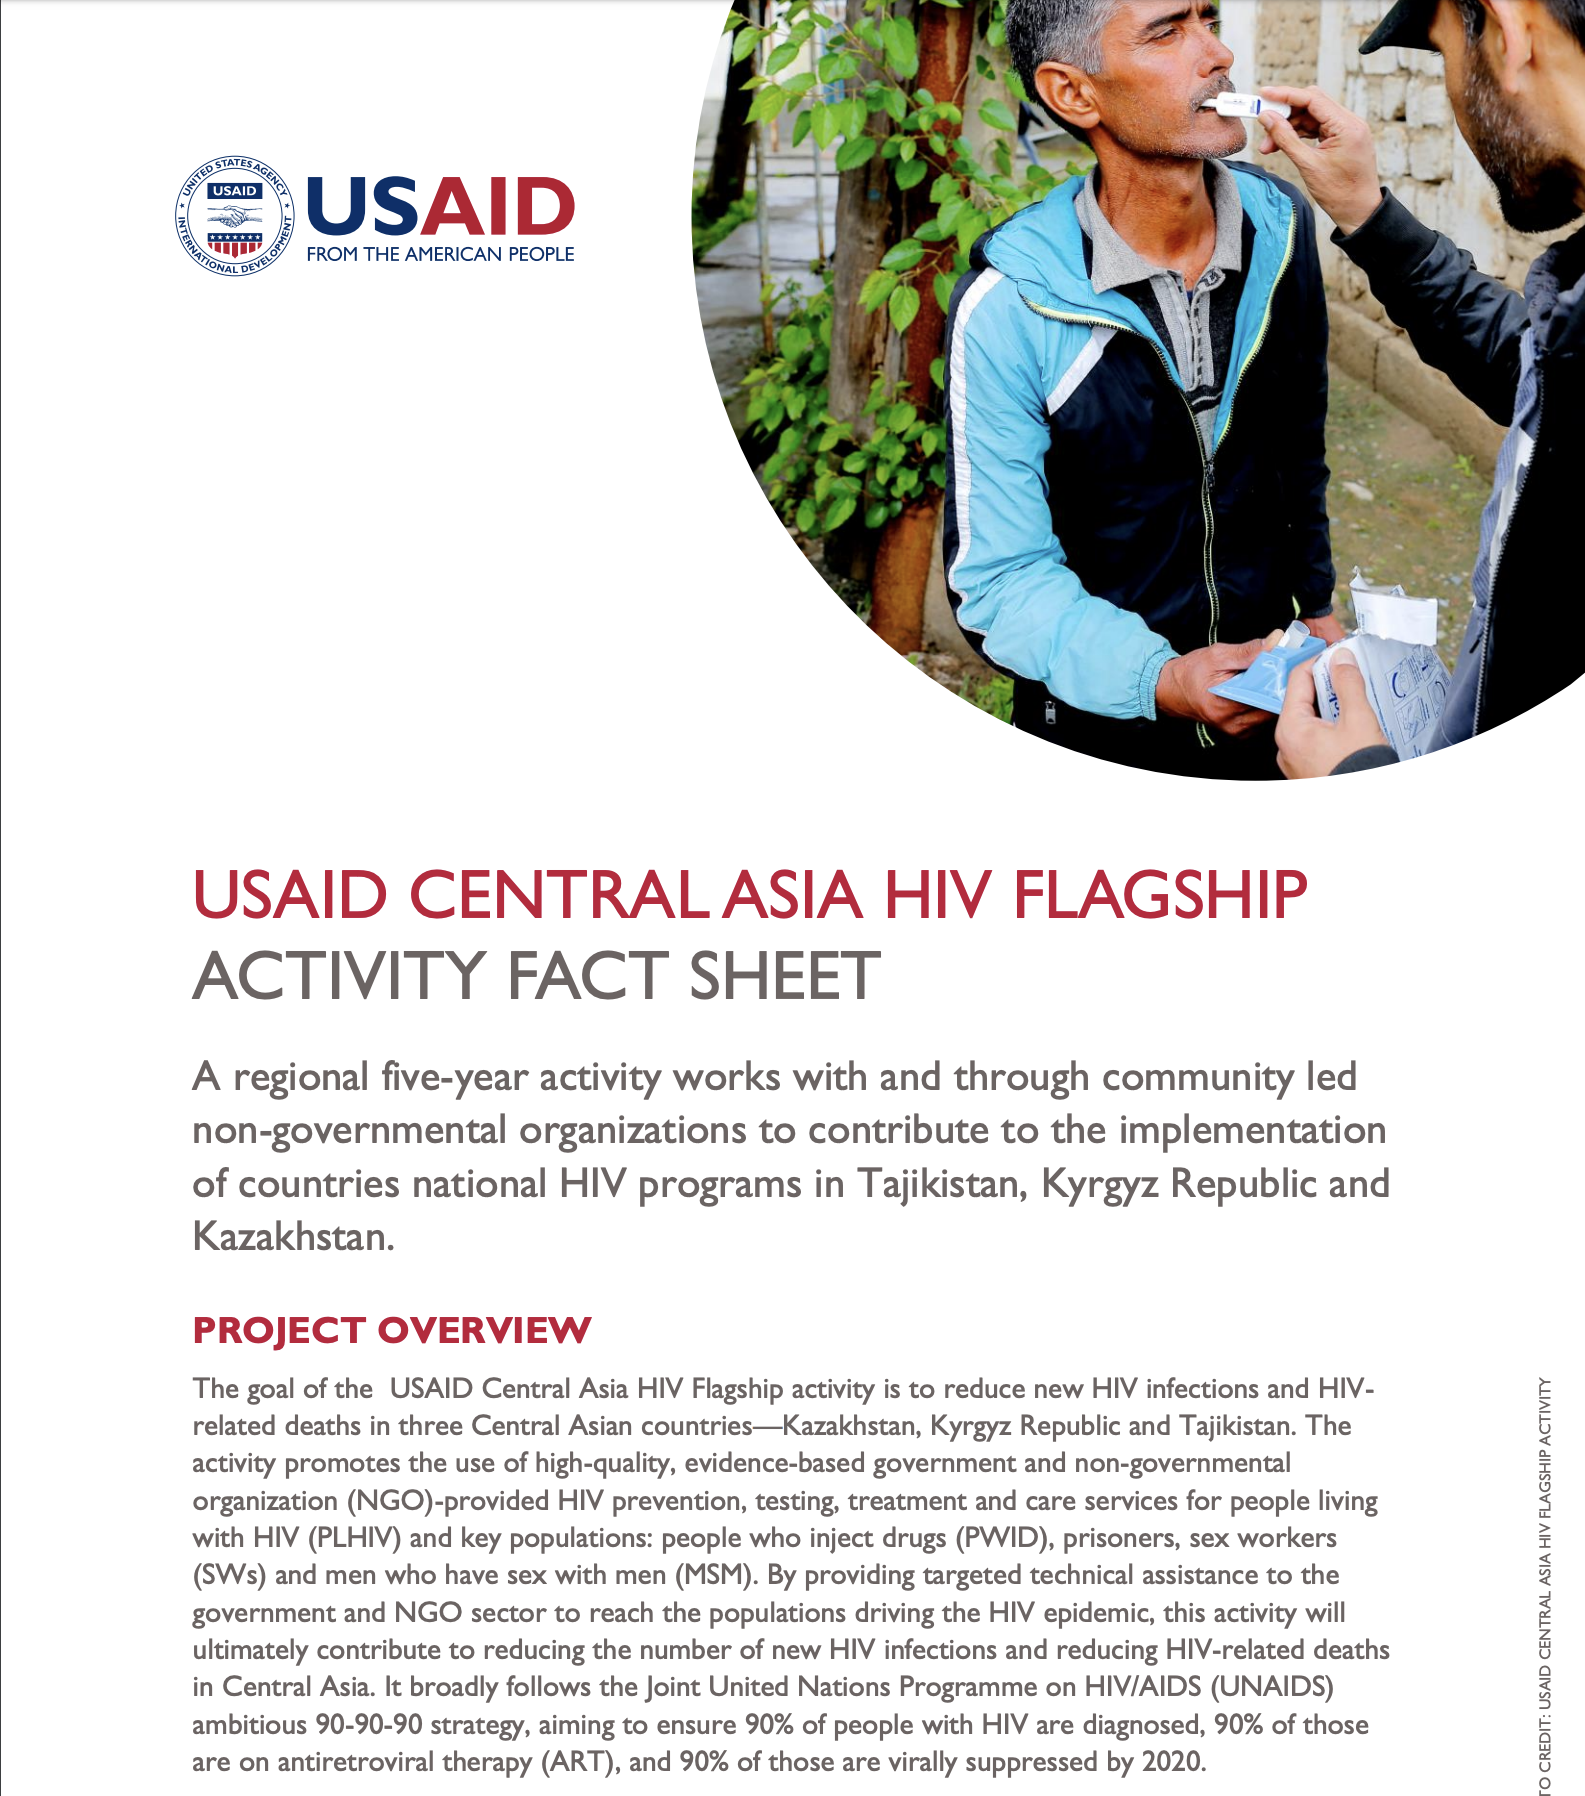 USAID Central Asia HIV Flagship Activity